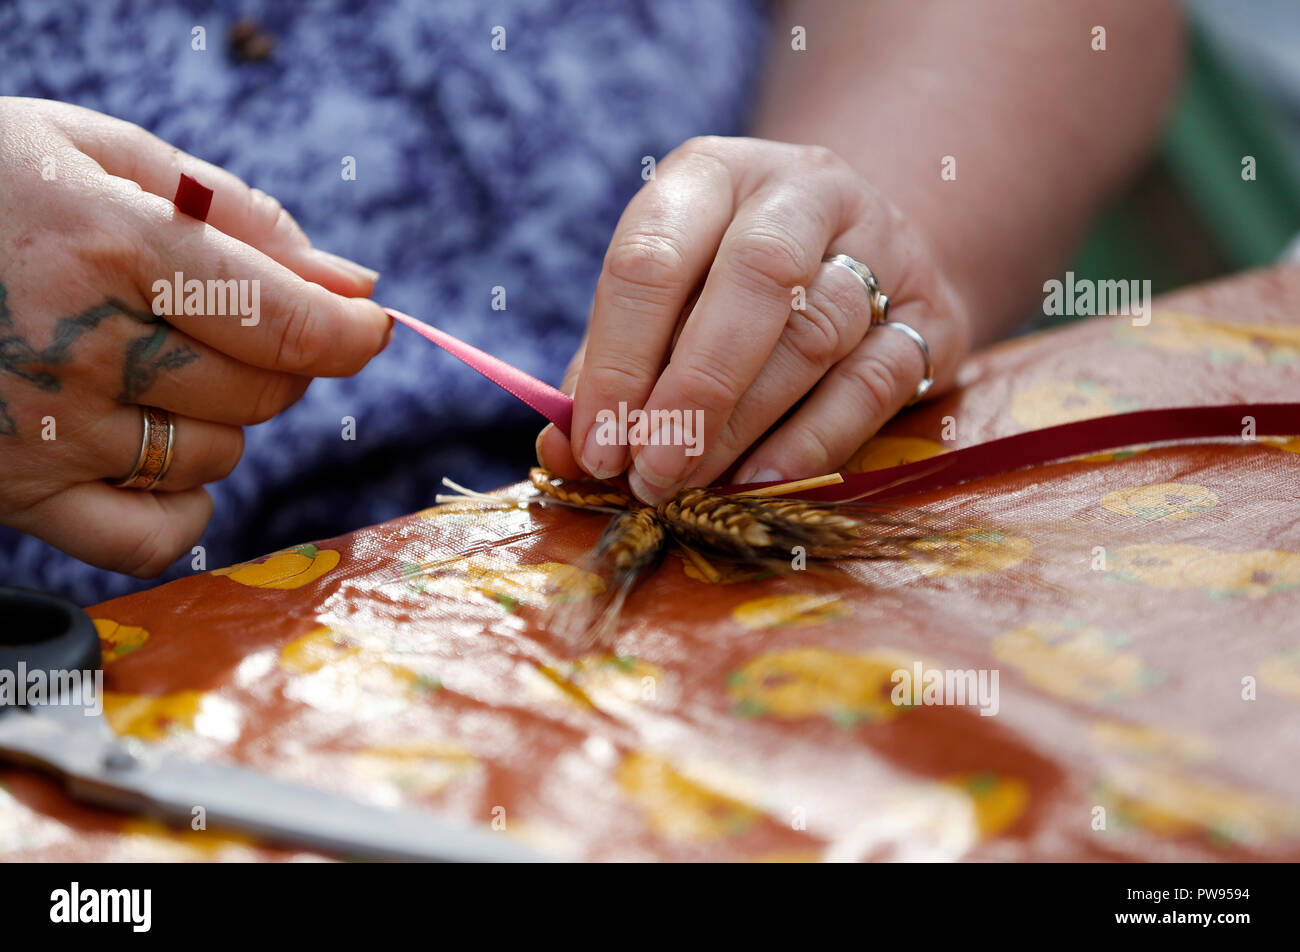 Los Angeles, USA. 13th Oct, 2018. An artist makes harvest-themed work during the Fall Festival held in the Farmers Market in Los Angeles, the United States, Oct. 13, 2018. The Fall Festival, held in the Farmers Market annually to celebrate the fall harvest, provides a free gathering that includes crafts, artisan demonstrations and live music. Credit: Li Ying/Xinhua/Alamy Live News Stock Photo